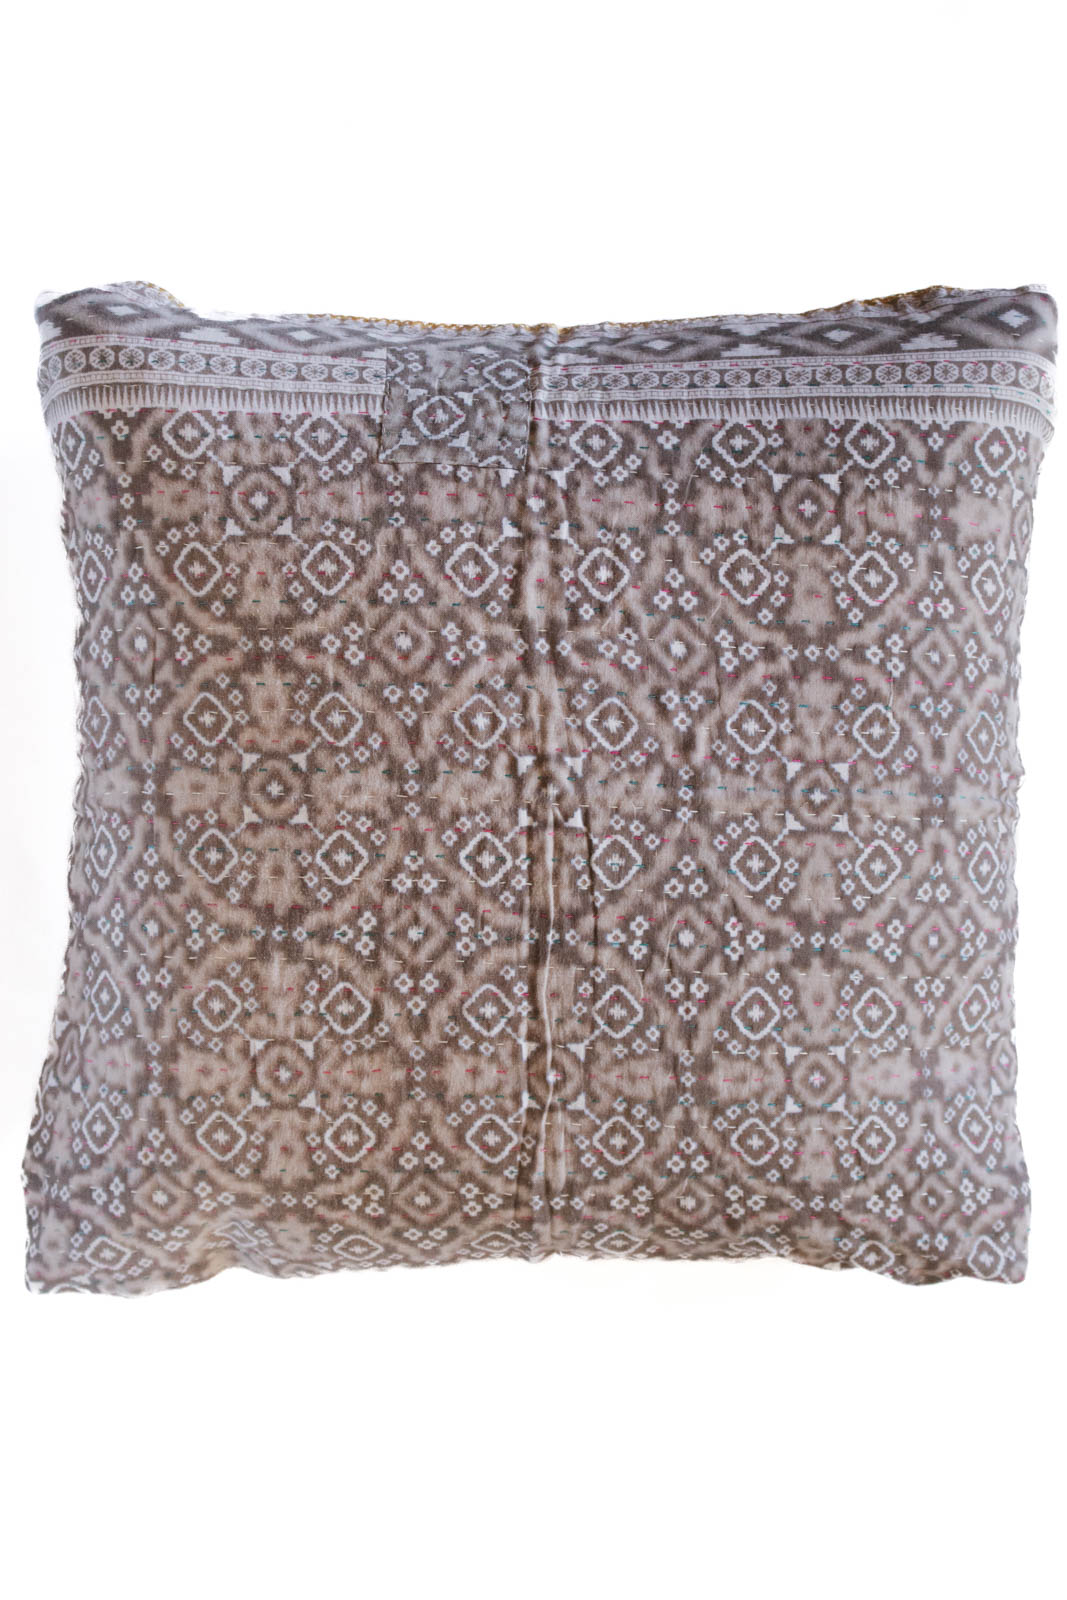 Worthy no. 6 Kantha Pillow Cover